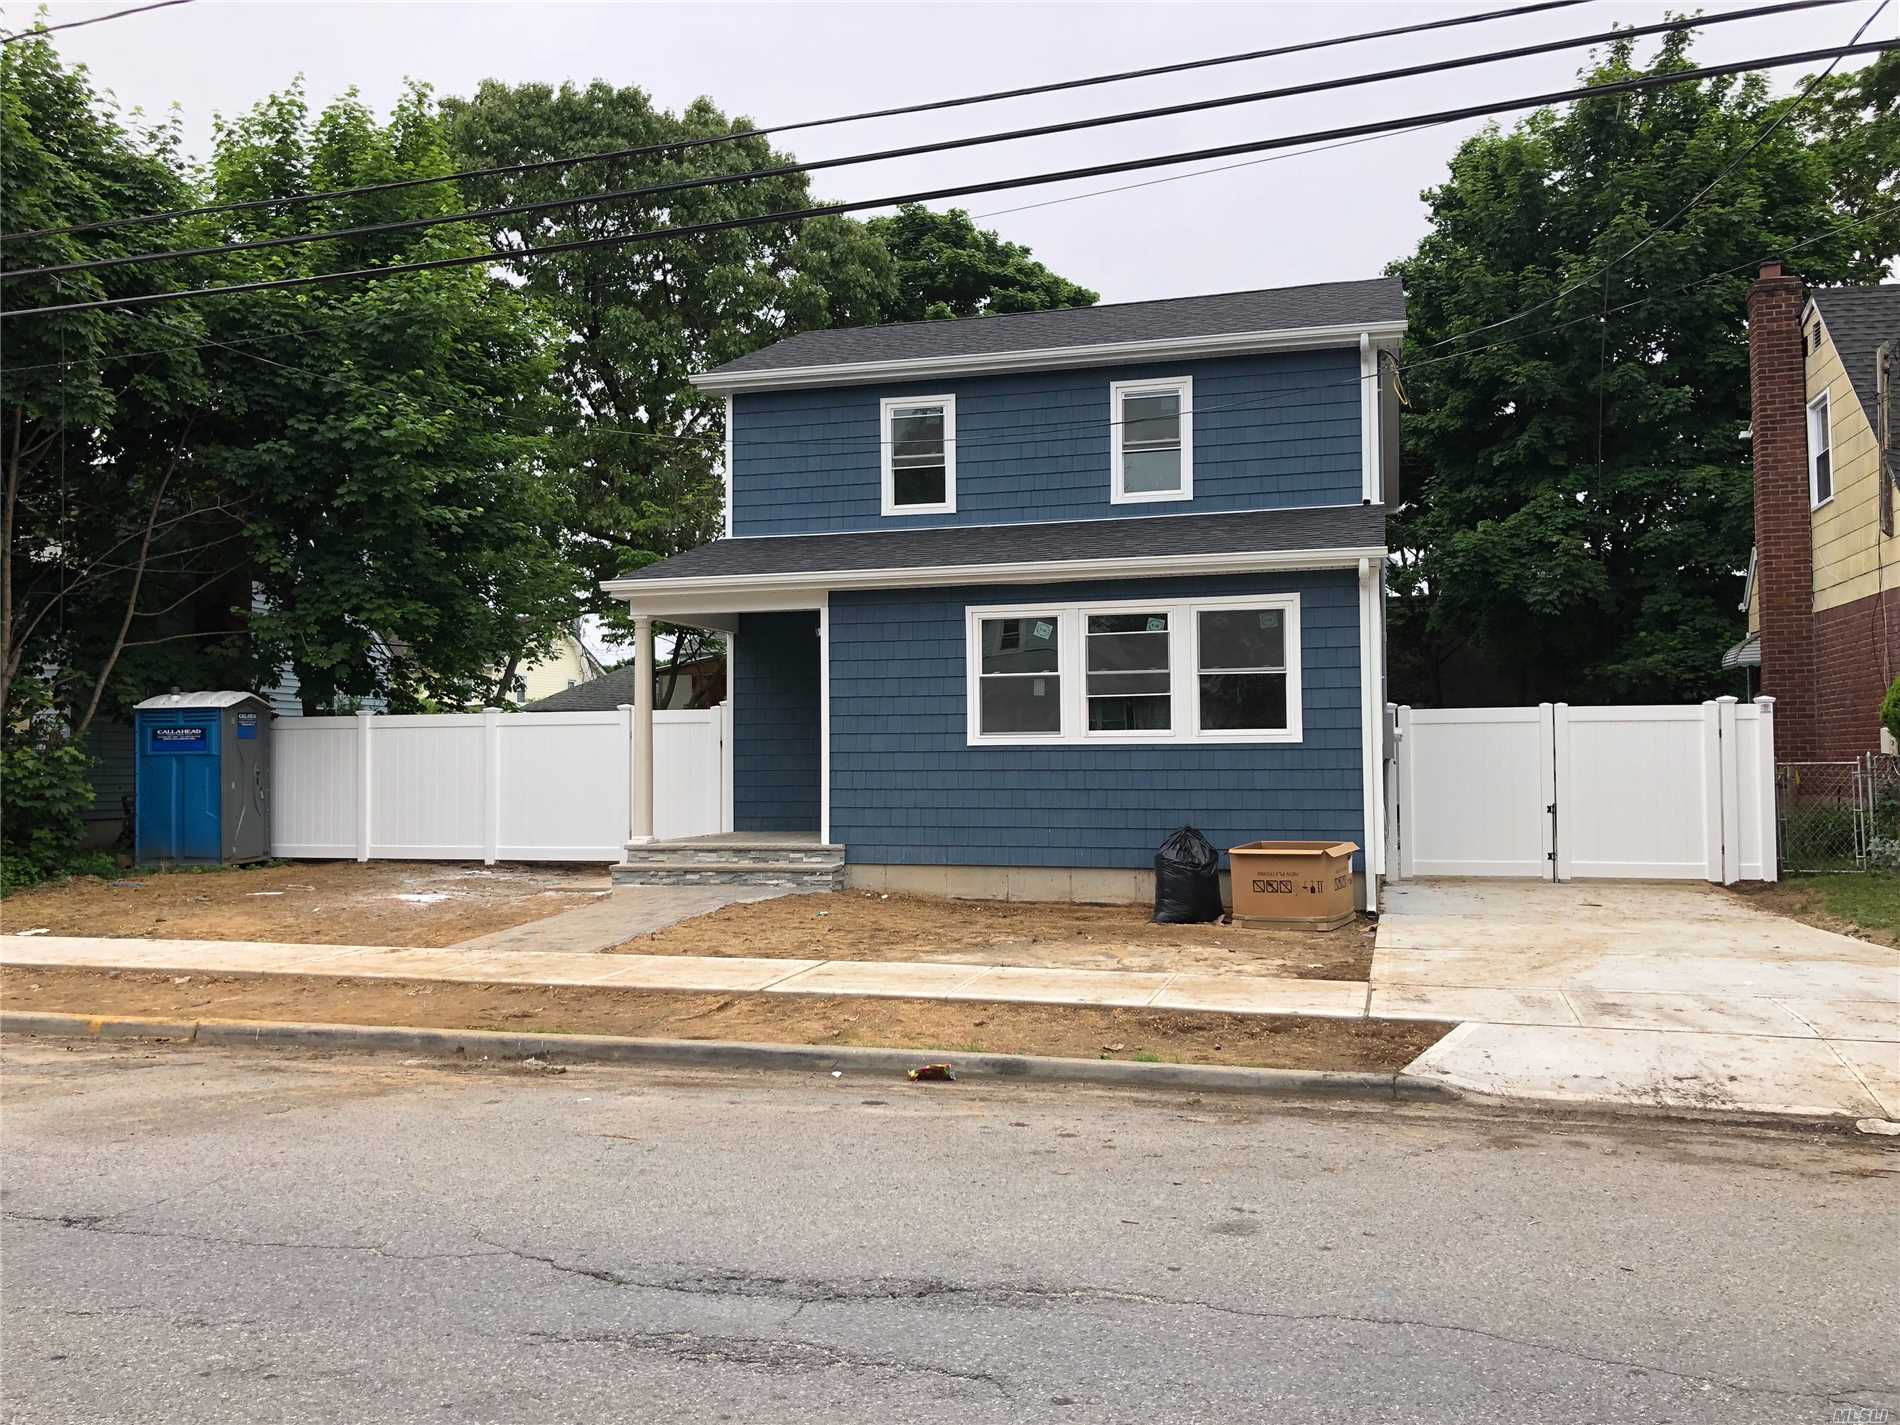 New Construction!!!! Amazing Property With All Amenities One Could Ask For, A True Hidden Gem!  Exquisite And Spacious 4+ Bedrooms, 3 Full Bathroom, Central Air, Custom Molding And Trim Through Out The House. Solid Wood Floors, Through Out The Second Floor.